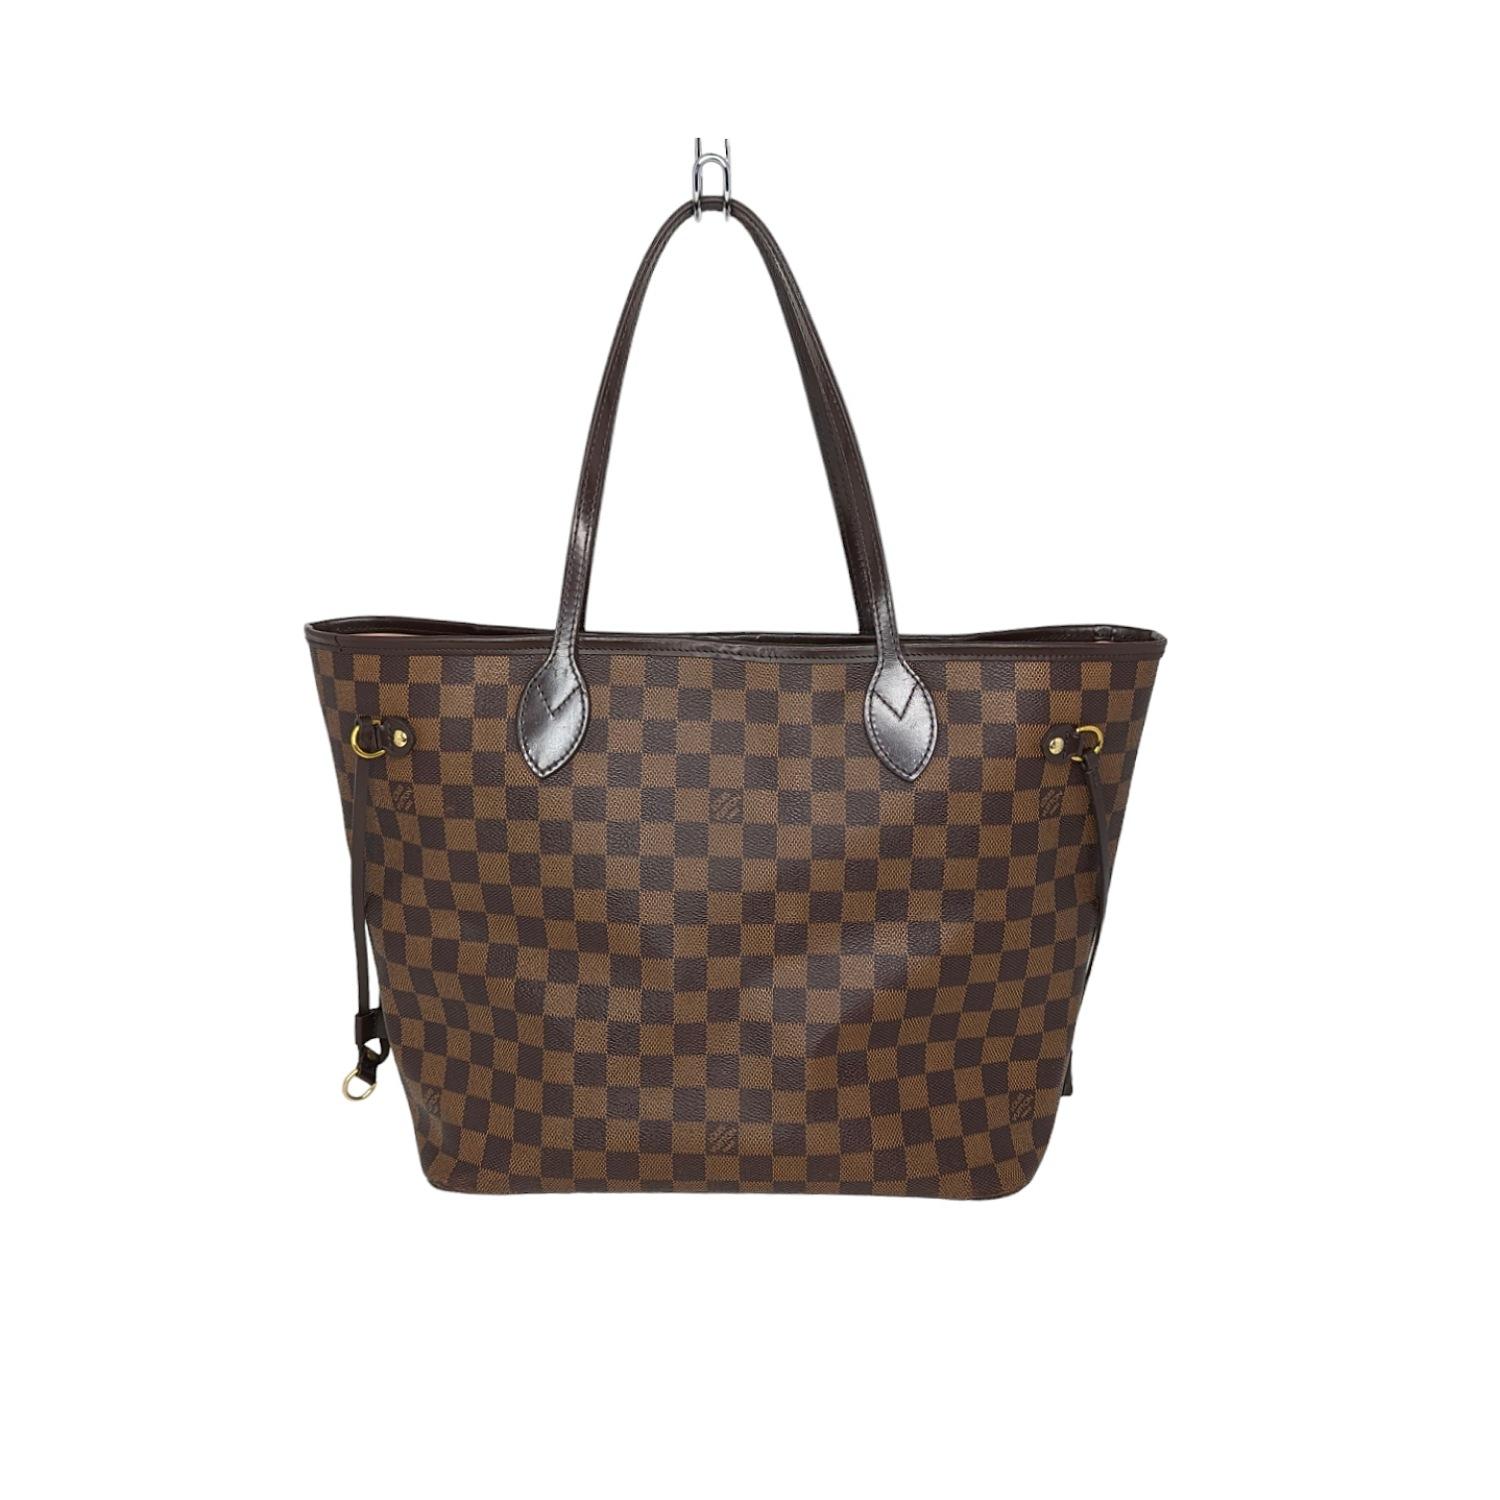 Louis Vuitton Neverfull Damier Ebene MM Tote with Pouch In Good Condition For Sale In Scottsdale, AZ